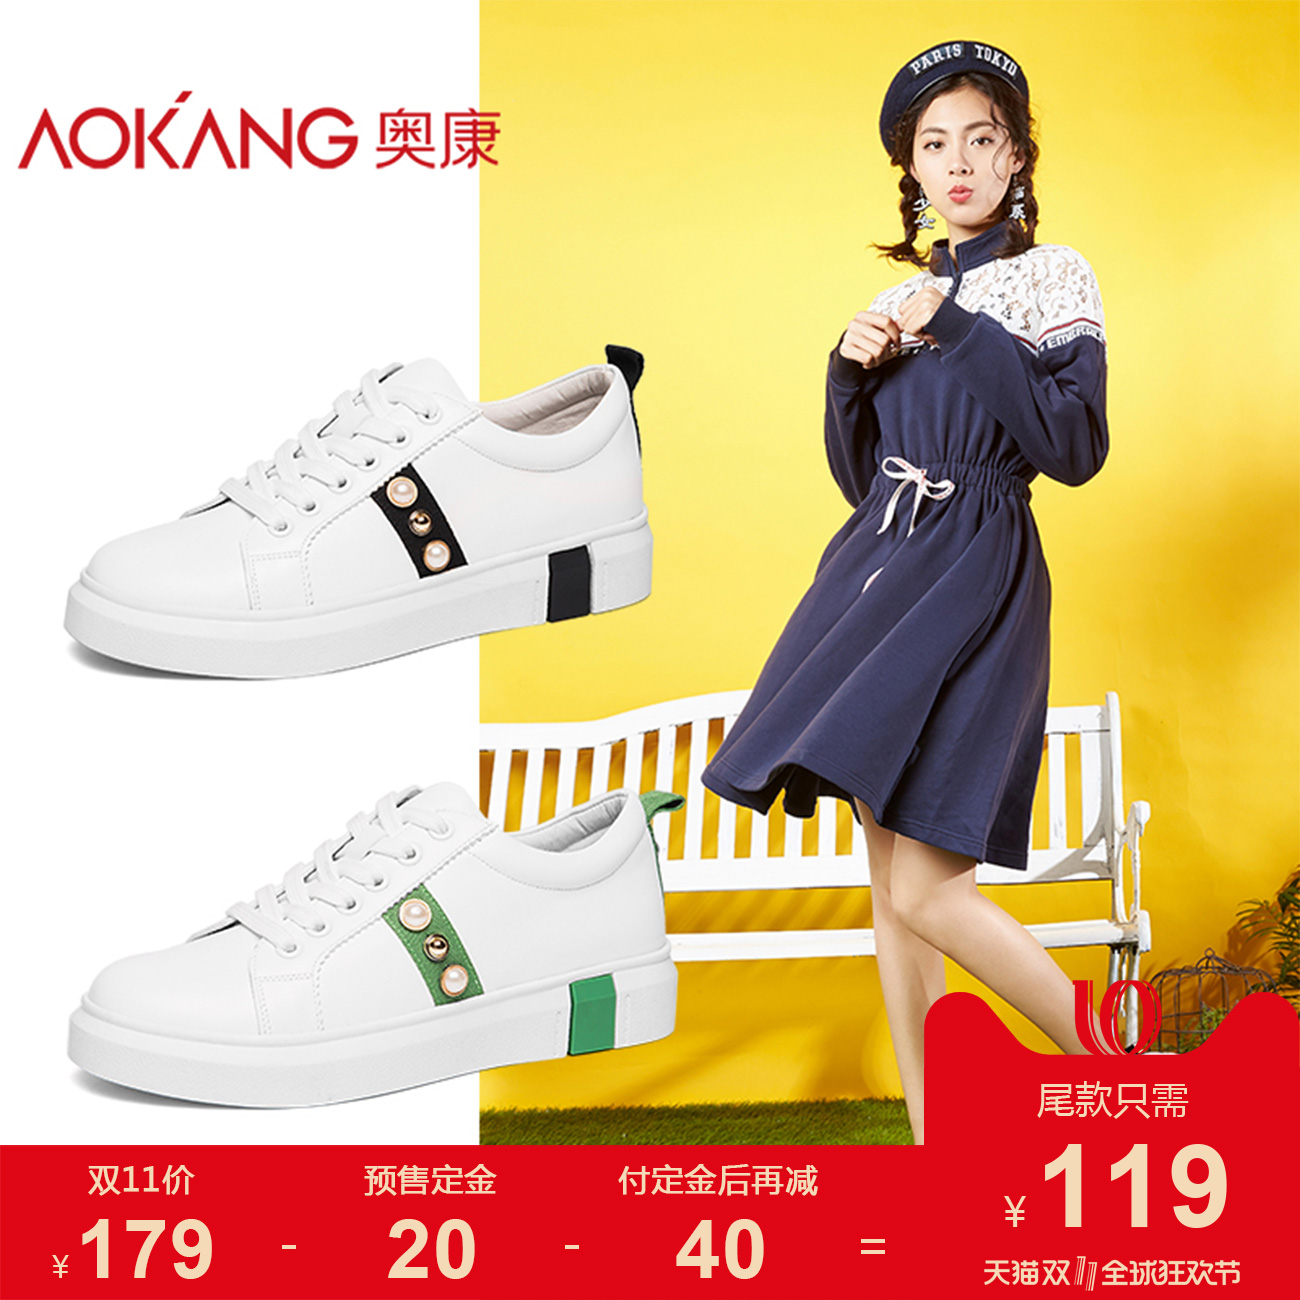 [Pre-sale] Aokang women's shoes 2018 new thick-soled pearl white shoes tide fashion flat women's shoes small shoes